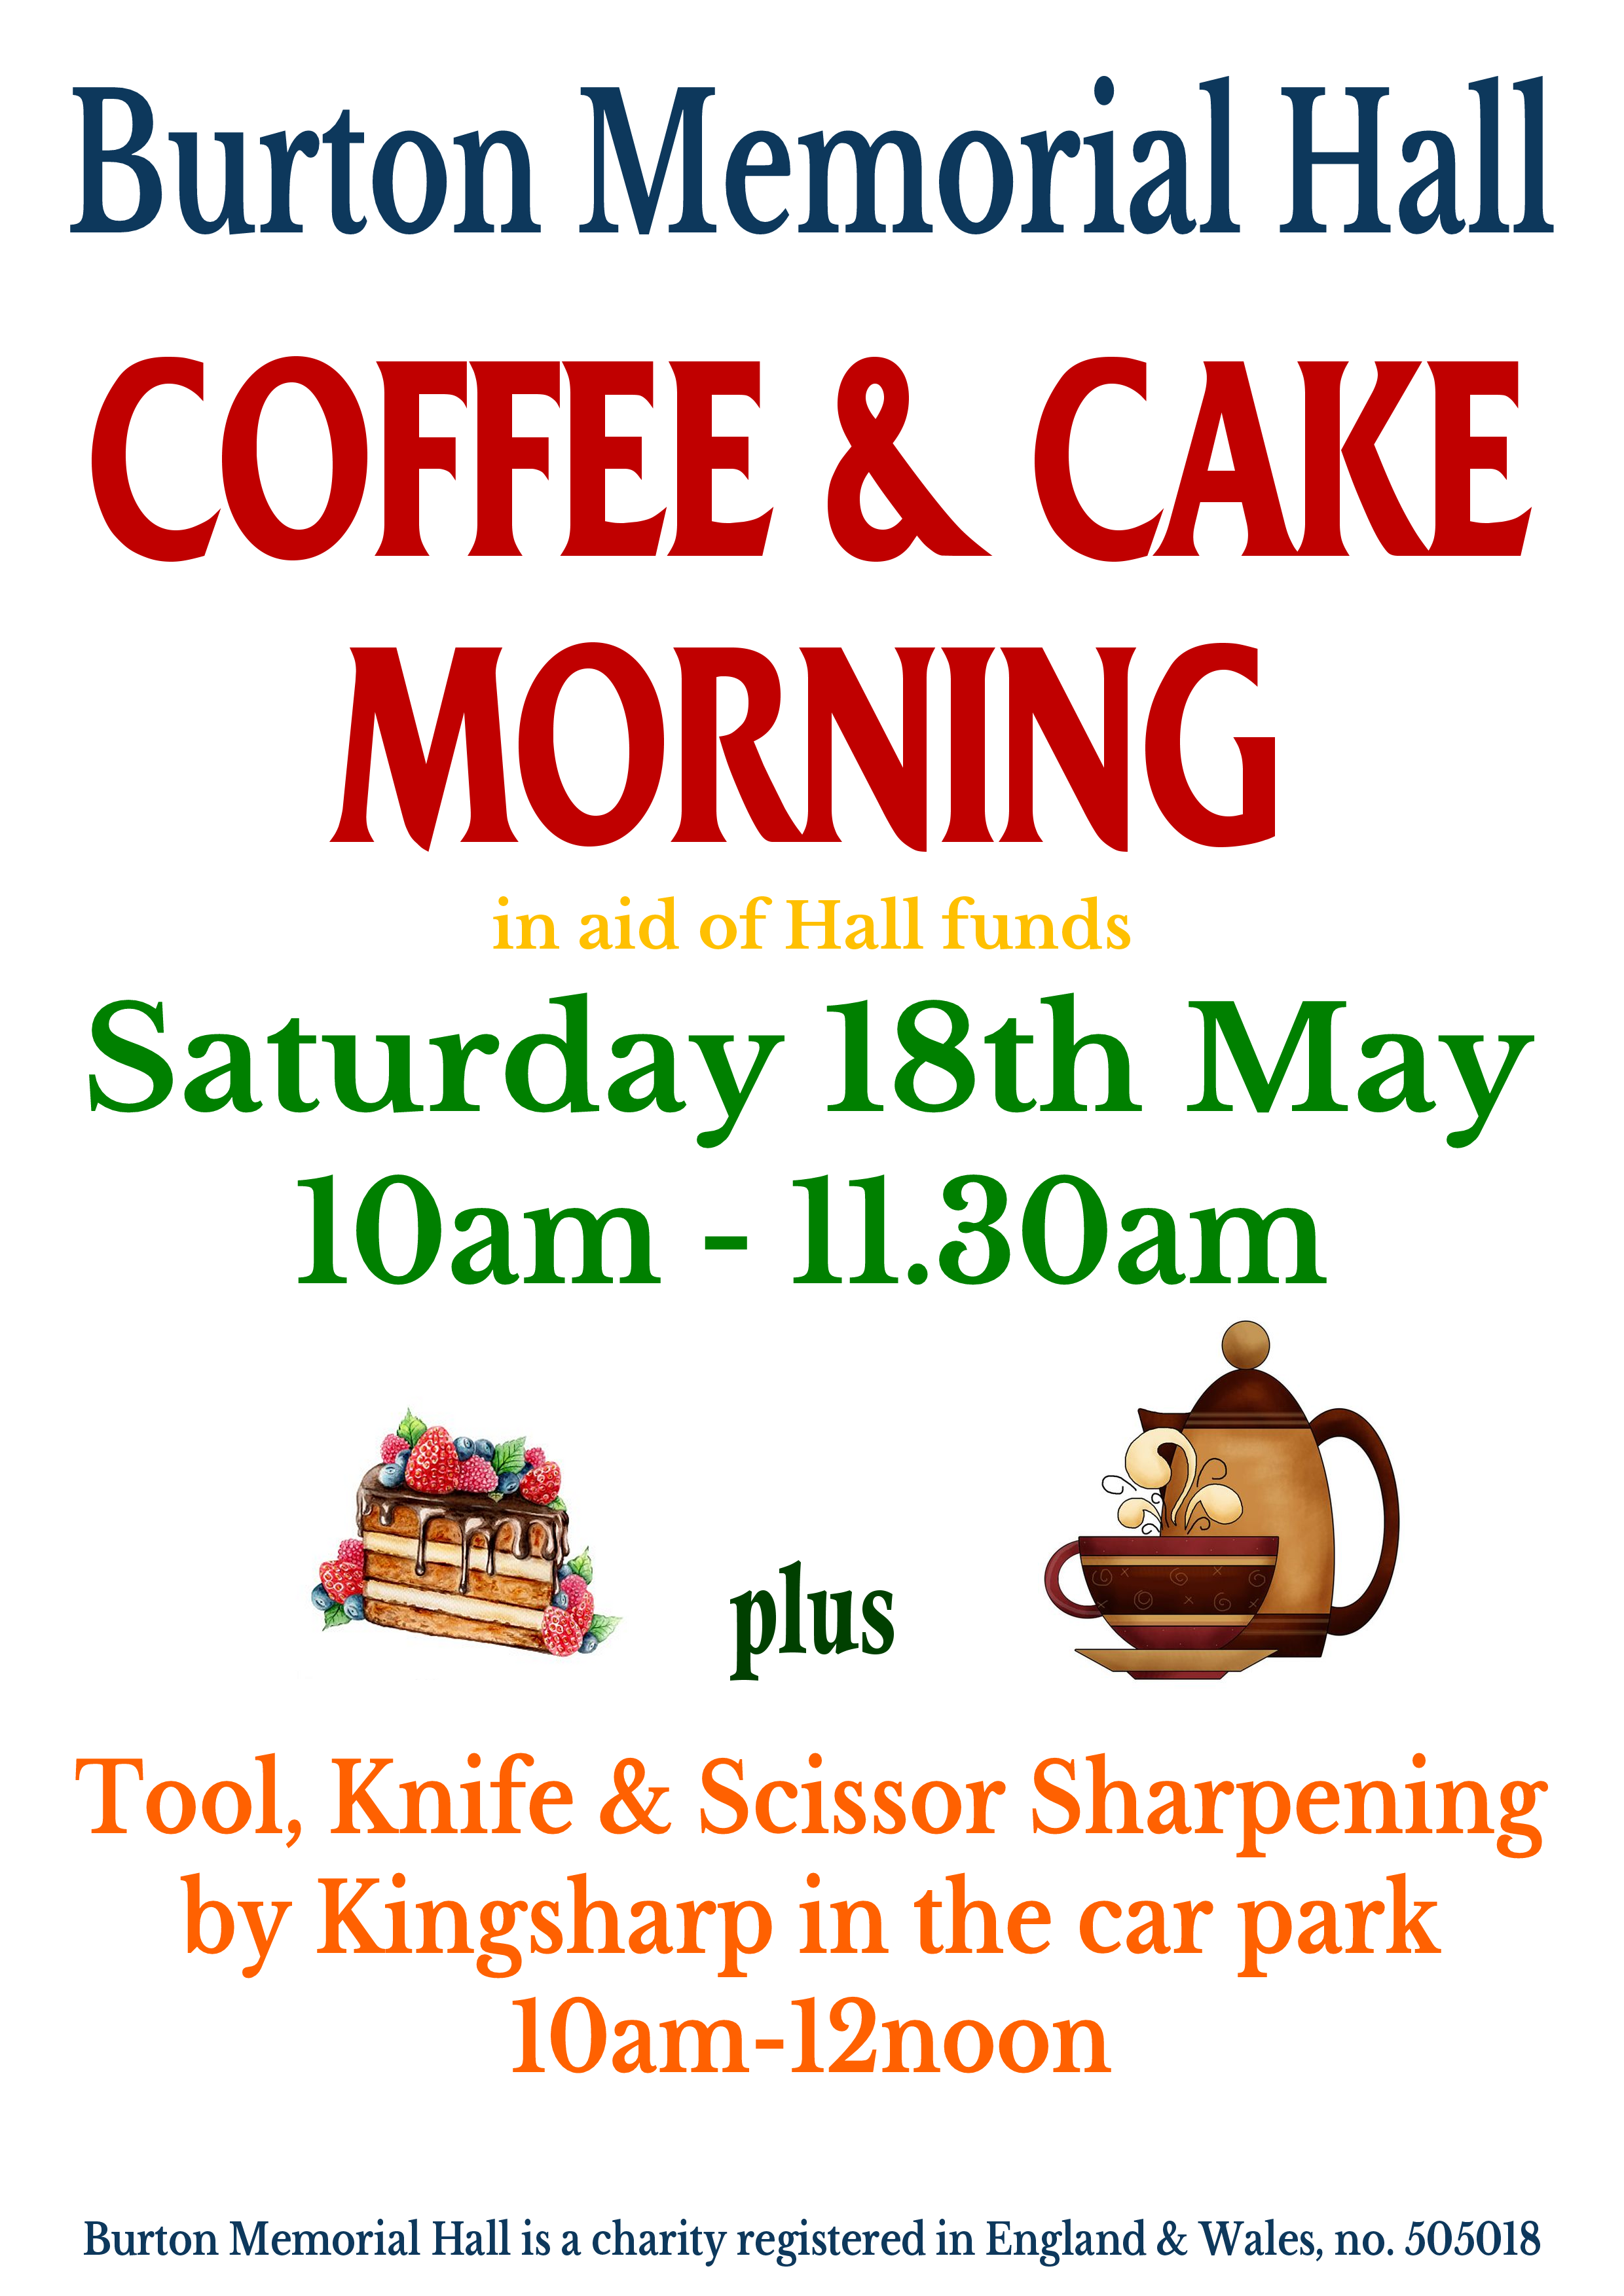 Mid-monthly coffee and cake morning at Burton Memorial Hall will be on Saturday 18th May from 10am-11.30am